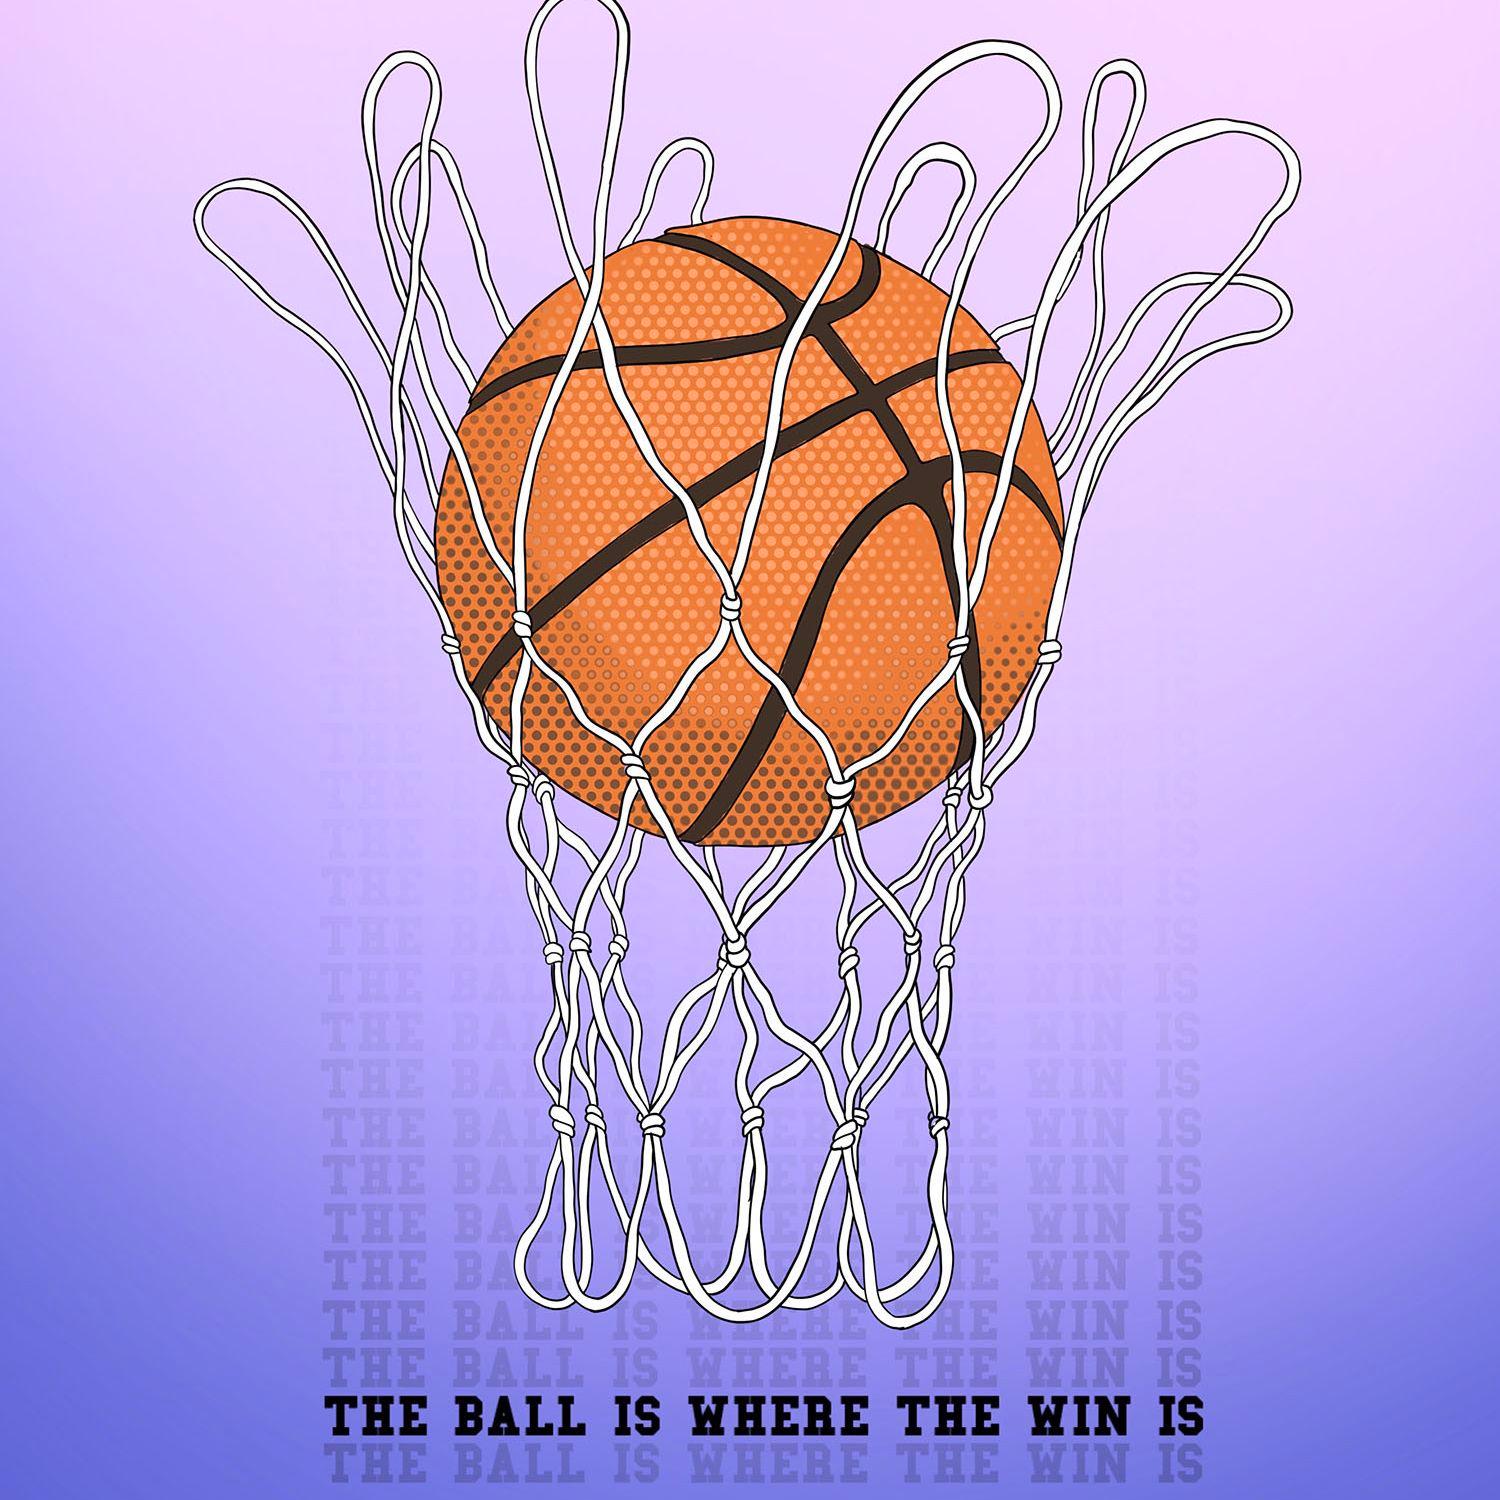 Thumbnail for "216 - The Ball Is Where the Win Is".